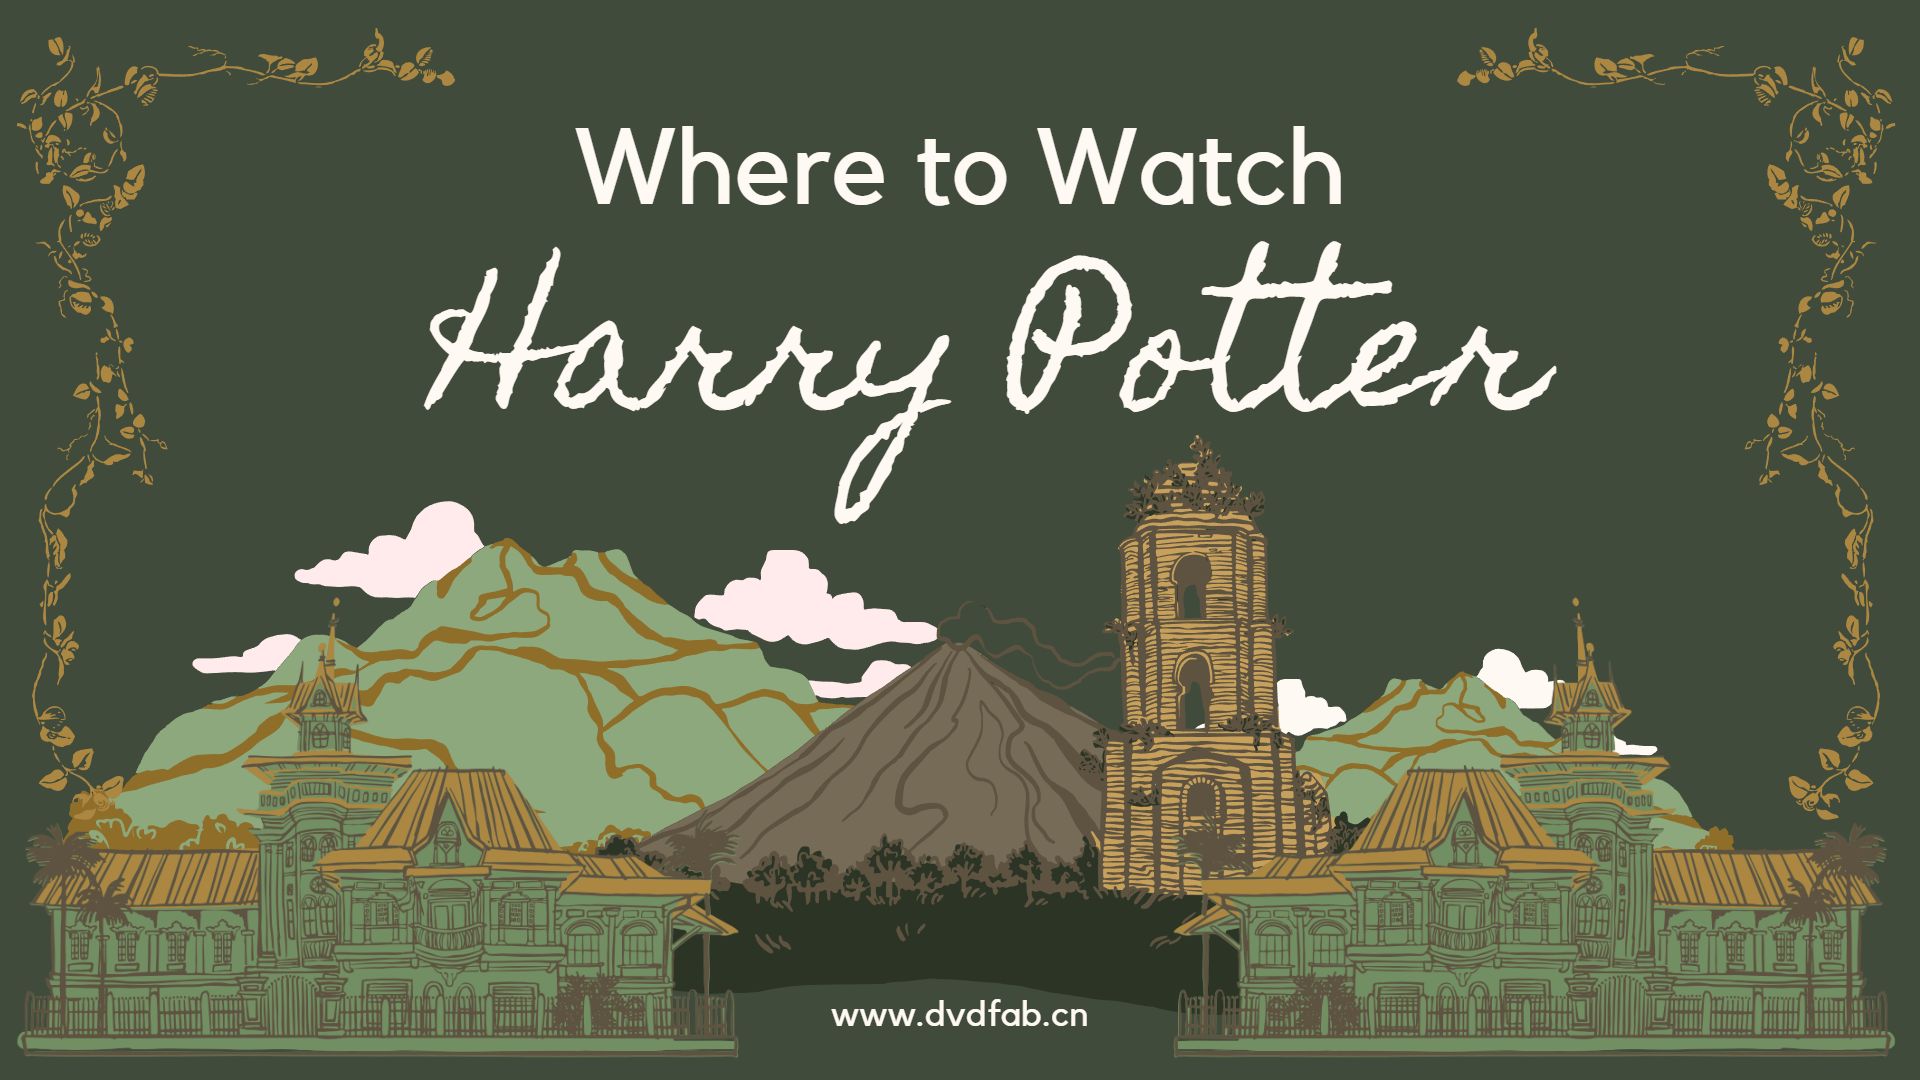 Harry Potter and the Prisoner of Azkaban, Where to Stream and Watch